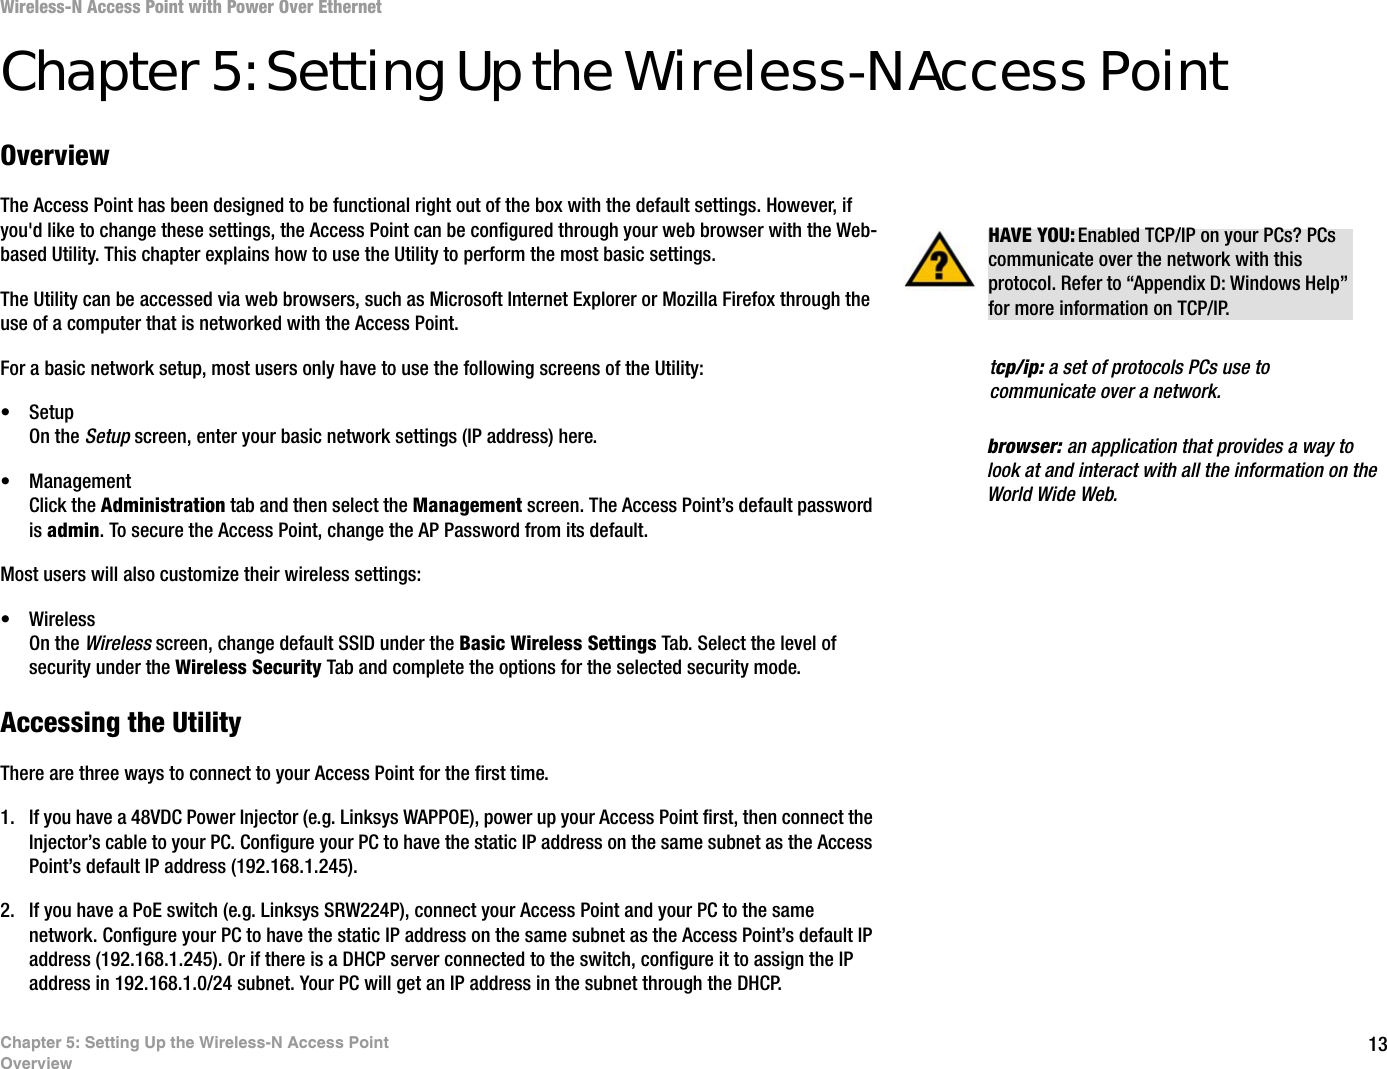 13Chapter 5: Setting Up the Wireless-N Access PointOverviewWireless-N Access Point with Power Over EthernetChapter 5: Setting Up the Wireless-N Access PointOverviewThe Access Point has been designed to be functional right out of the box with the default settings. However, if you&apos;d like to change these settings, the Access Point can be configured through your web browser with the Web-based Utility. This chapter explains how to use the Utility to perform the most basic settings.The Utility can be accessed via web browsers, such as Microsoft Internet Explorer or Mozilla Firefox through the use of a computer that is networked with the Access Point.For a basic network setup, most users only have to use the following screens of the Utility:• SetupOn the Setup screen, enter your basic network settings (IP address) here.• ManagementClick the Administration tab and then select the Management screen. The Access Point’s default password is admin. To secure the Access Point, change the AP Password from its default.Most users will also customize their wireless settings:• WirelessOn the Wireless screen, change default SSID under the Basic Wireless Settings Tab. Select the level of security under the Wireless Security Tab and complete the options for the selected security mode.Accessing the UtilityThere are three ways to connect to your Access Point for the first time. 1. If you have a 48VDC Power Injector (e.g. Linksys WAPPOE), power up your Access Point first, then connect the Injector’s cable to your PC. Configure your PC to have the static IP address on the same subnet as the Access Point’s default IP address (192.168.1.245). 2. If you have a PoE switch (e.g. Linksys SRW224P), connect your Access Point and your PC to the same network. Configure your PC to have the static IP address on the same subnet as the Access Point’s default IP address (192.168.1.245). Or if there is a DHCP server connected to the switch, configure it to assign the IP address in 192.168.1.0/24 subnet. Your PC will get an IP address in the subnet through the DHCP.HAVE YOU: Enabled TCP/IP on your PCs? PCs communicate over the network with this protocol. Refer to “Appendix D: Windows Help” for more information on TCP/IP.browser: an application that provides a way to look at and interact with all the information on the World Wide Web. tcp/ip: a set of protocols PCs use to communicate over a network.